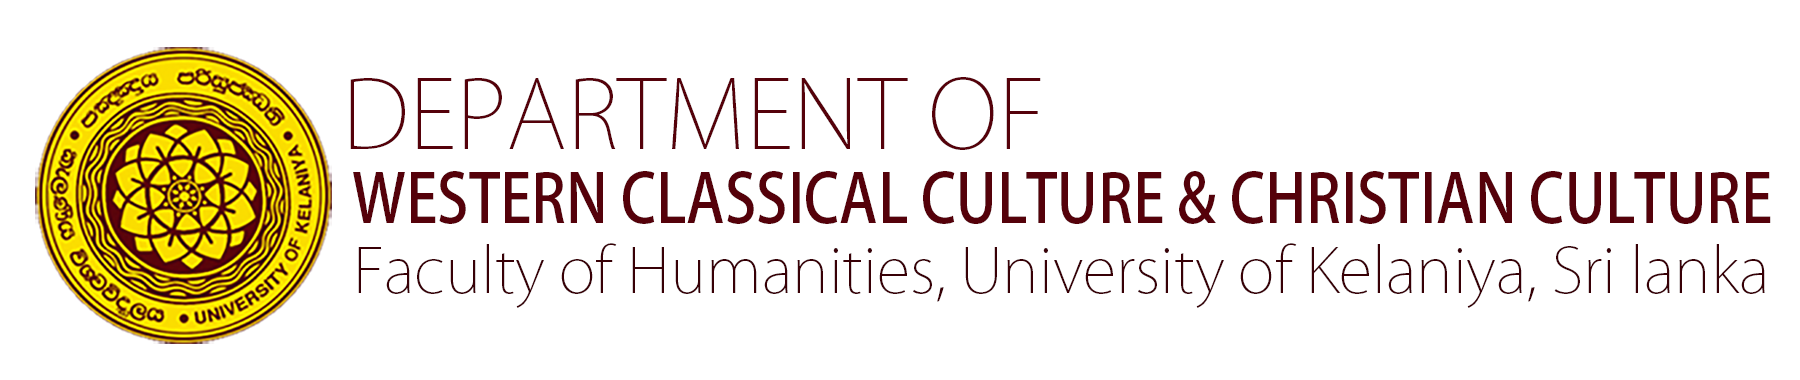 Department of Western Classical Culture & Christian